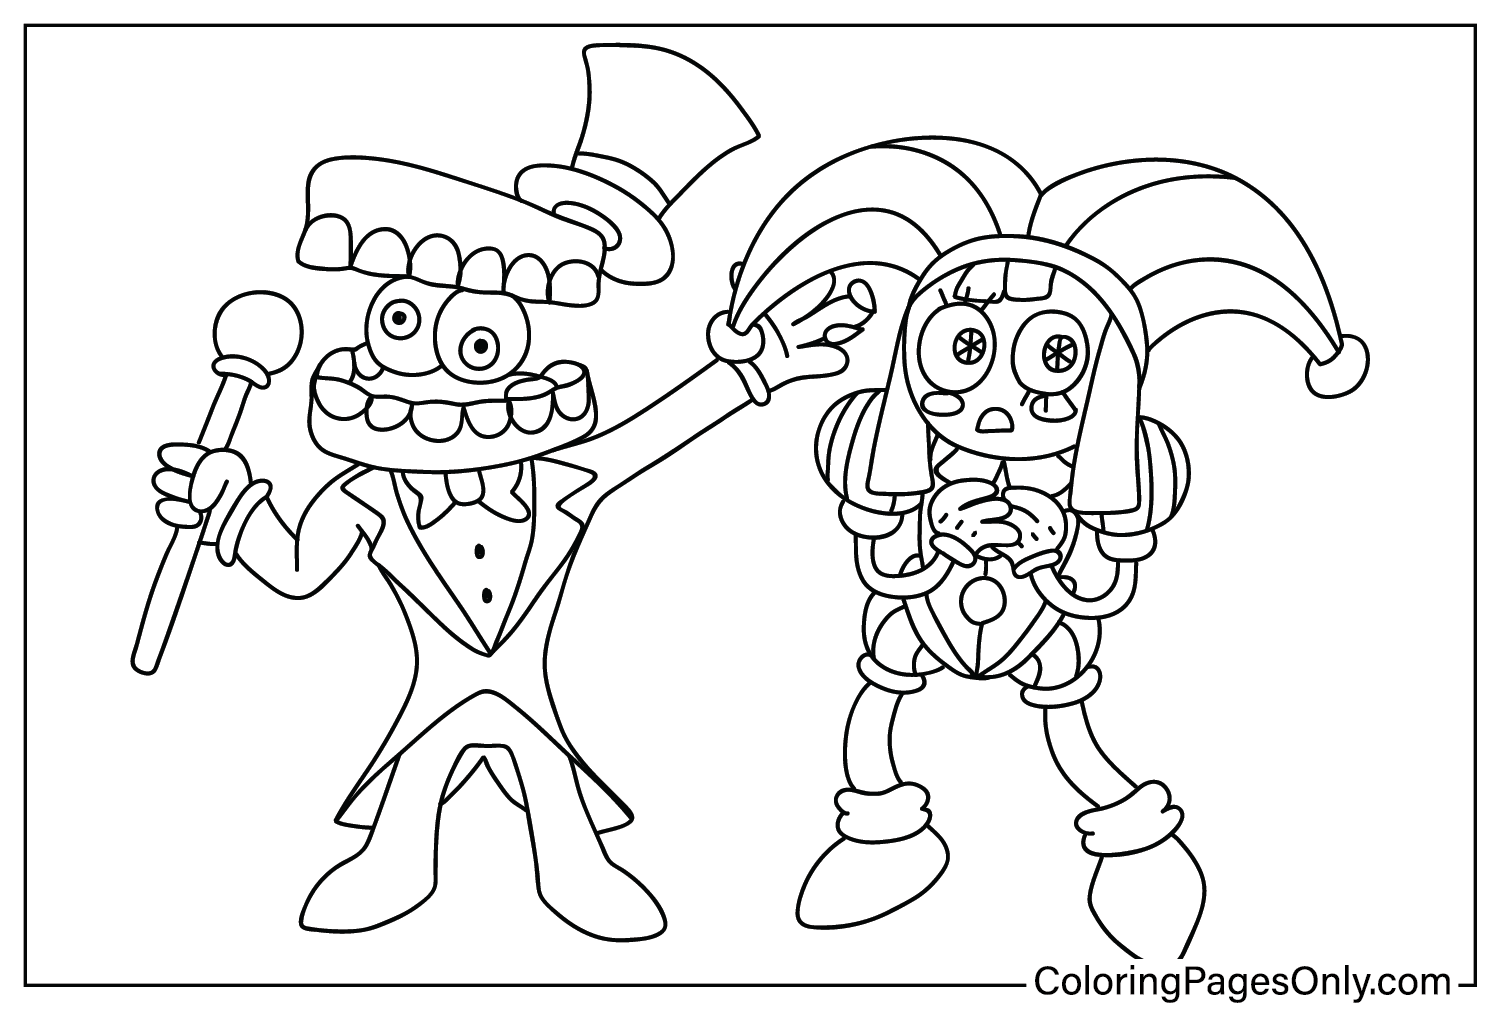 Pomni and Caine Coloring Page from Pomni